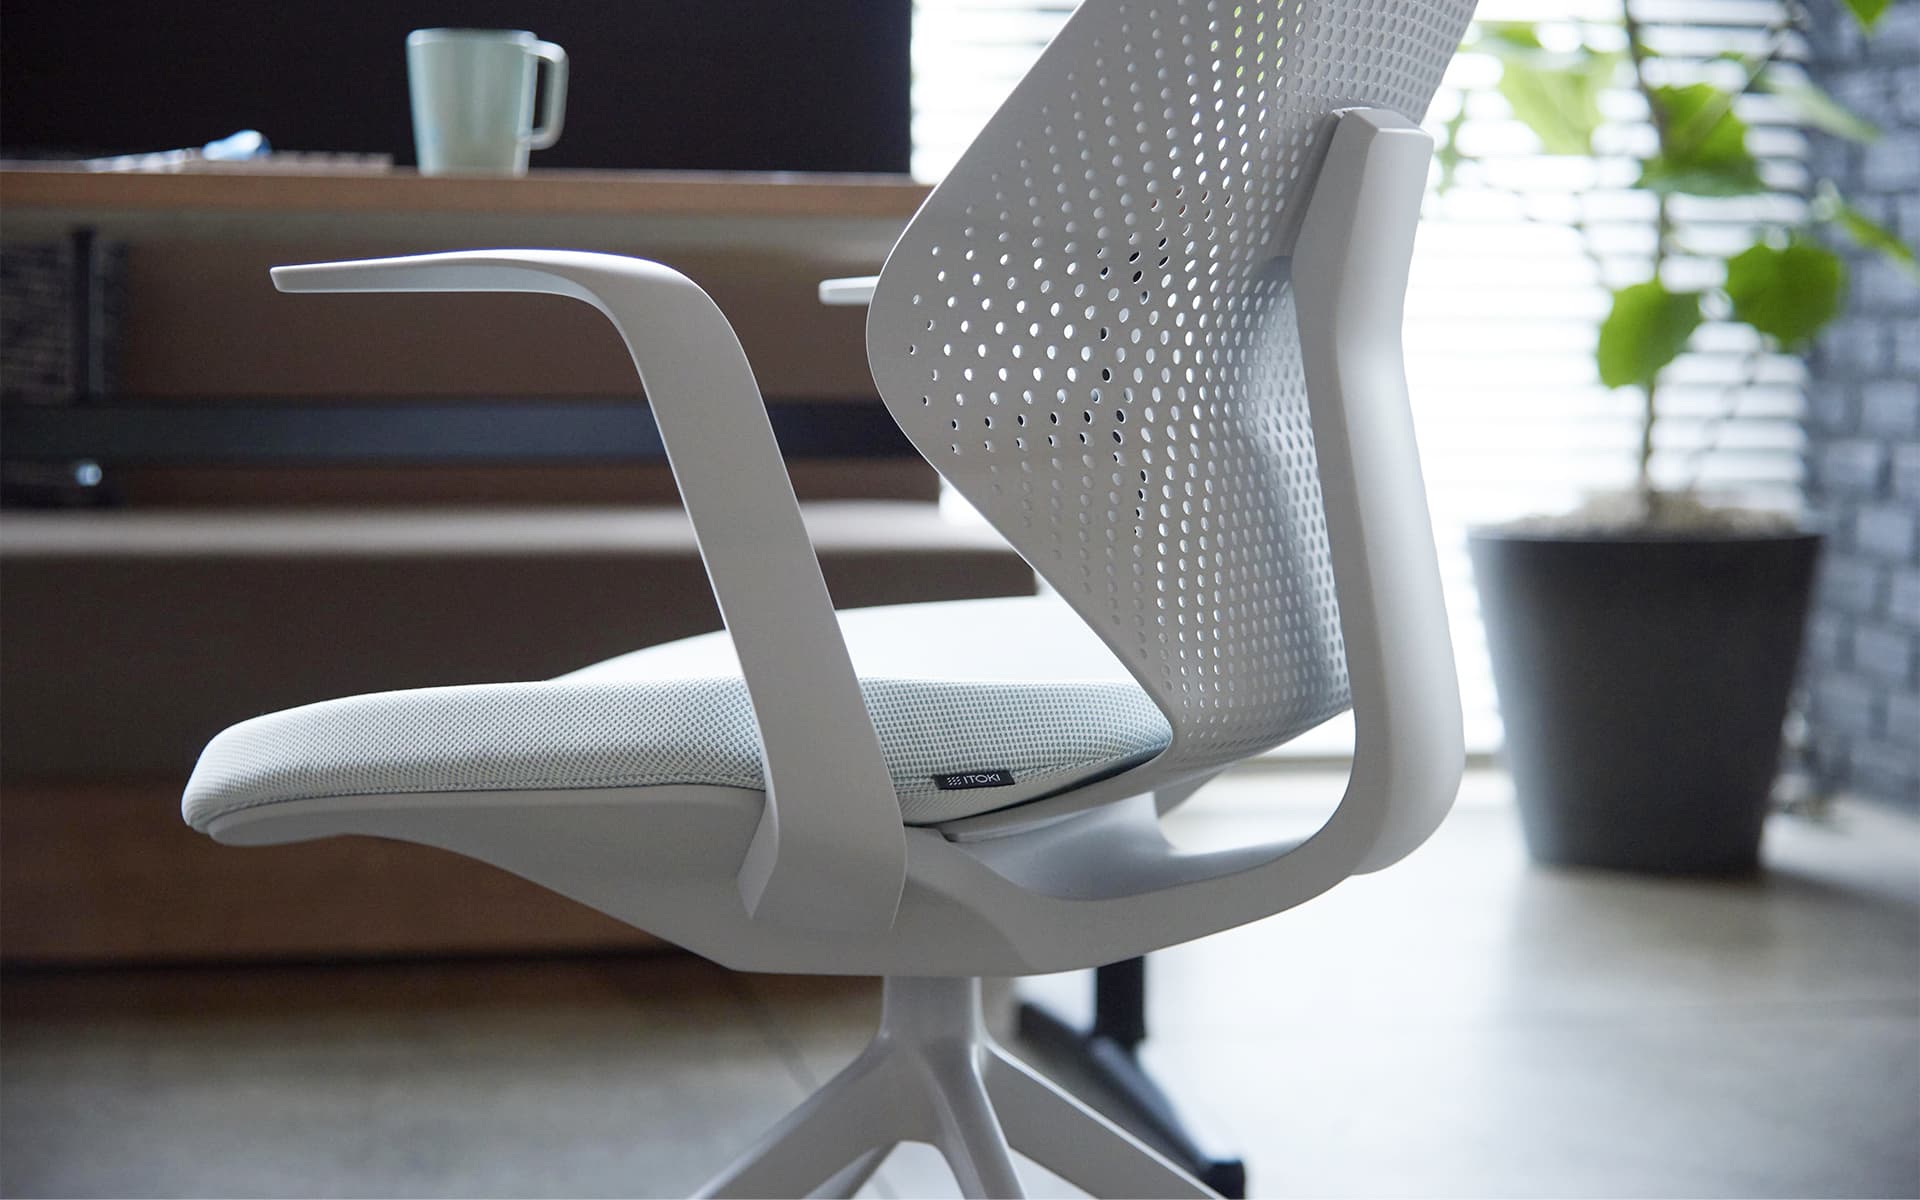 A white ITOKI QuA office chair by ITO Design in front of a natural wood desk with mug